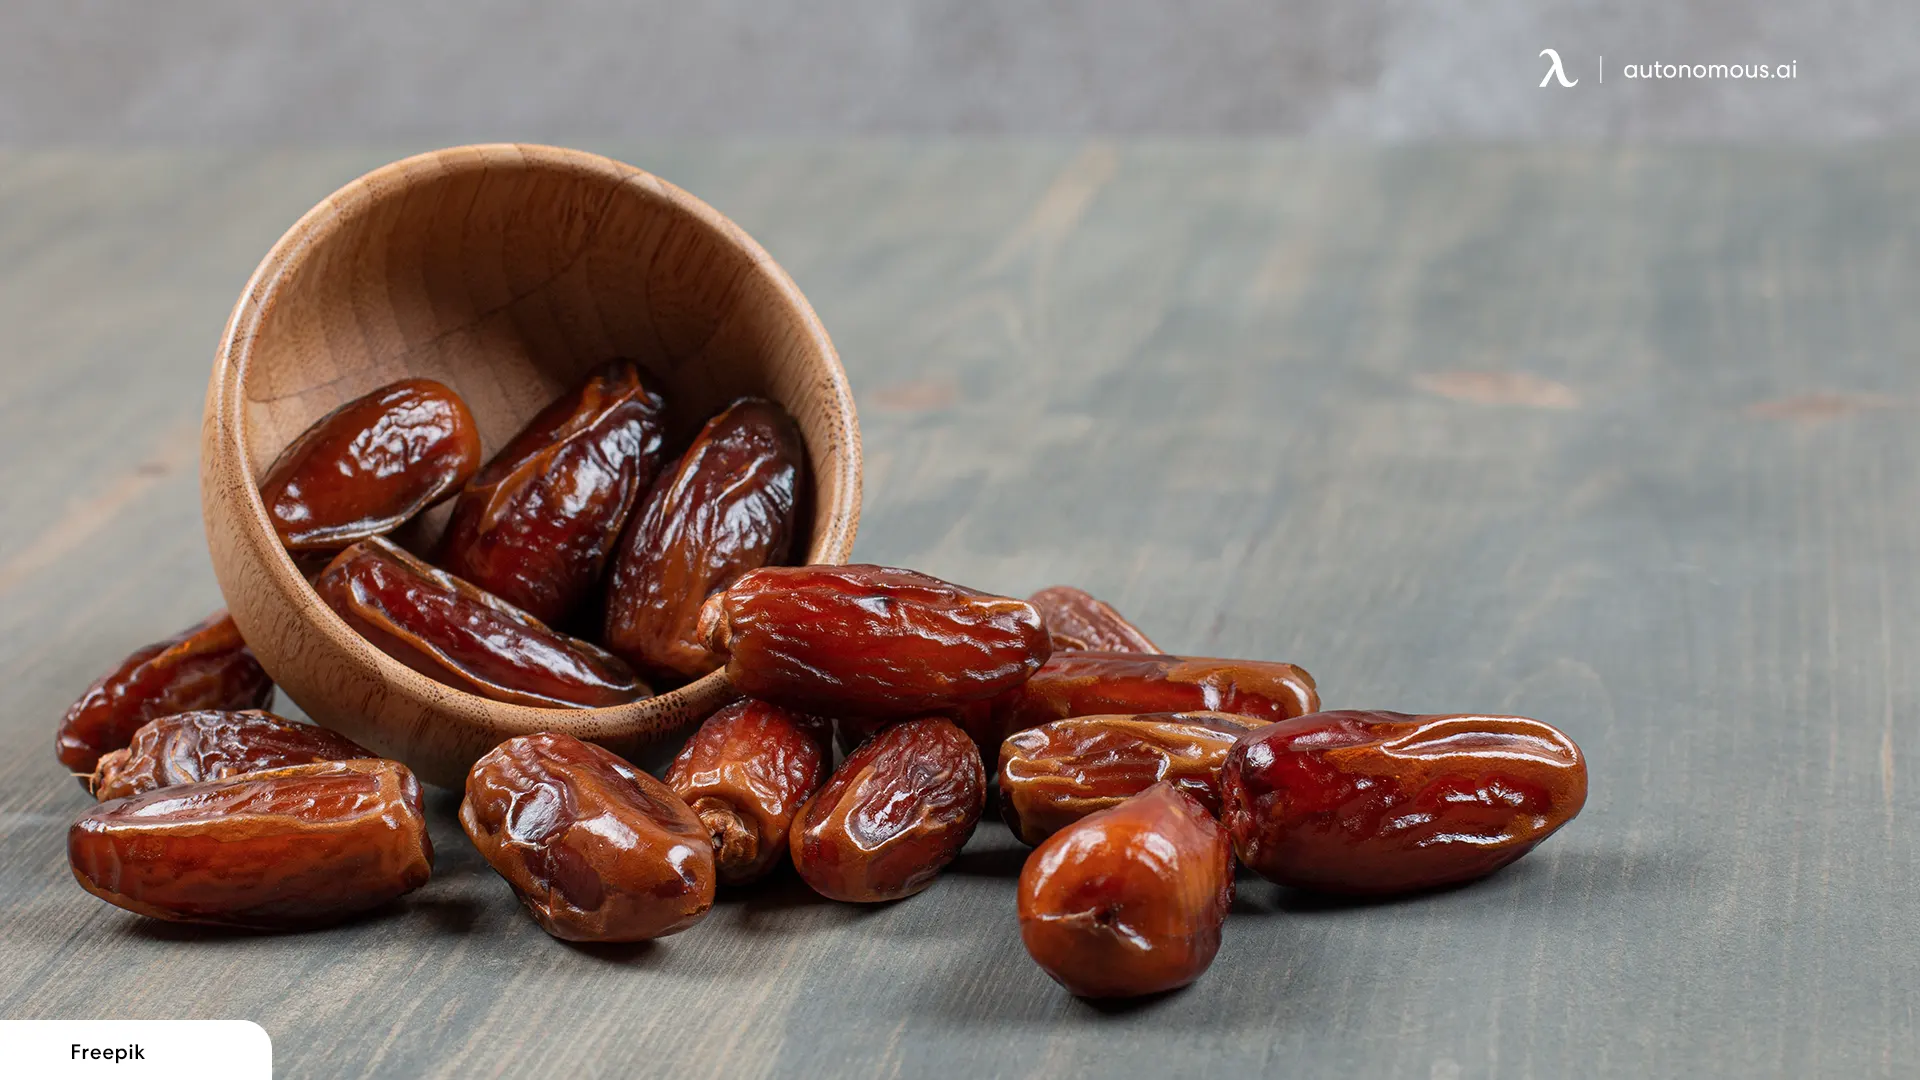 Dates - Pre-workout snack